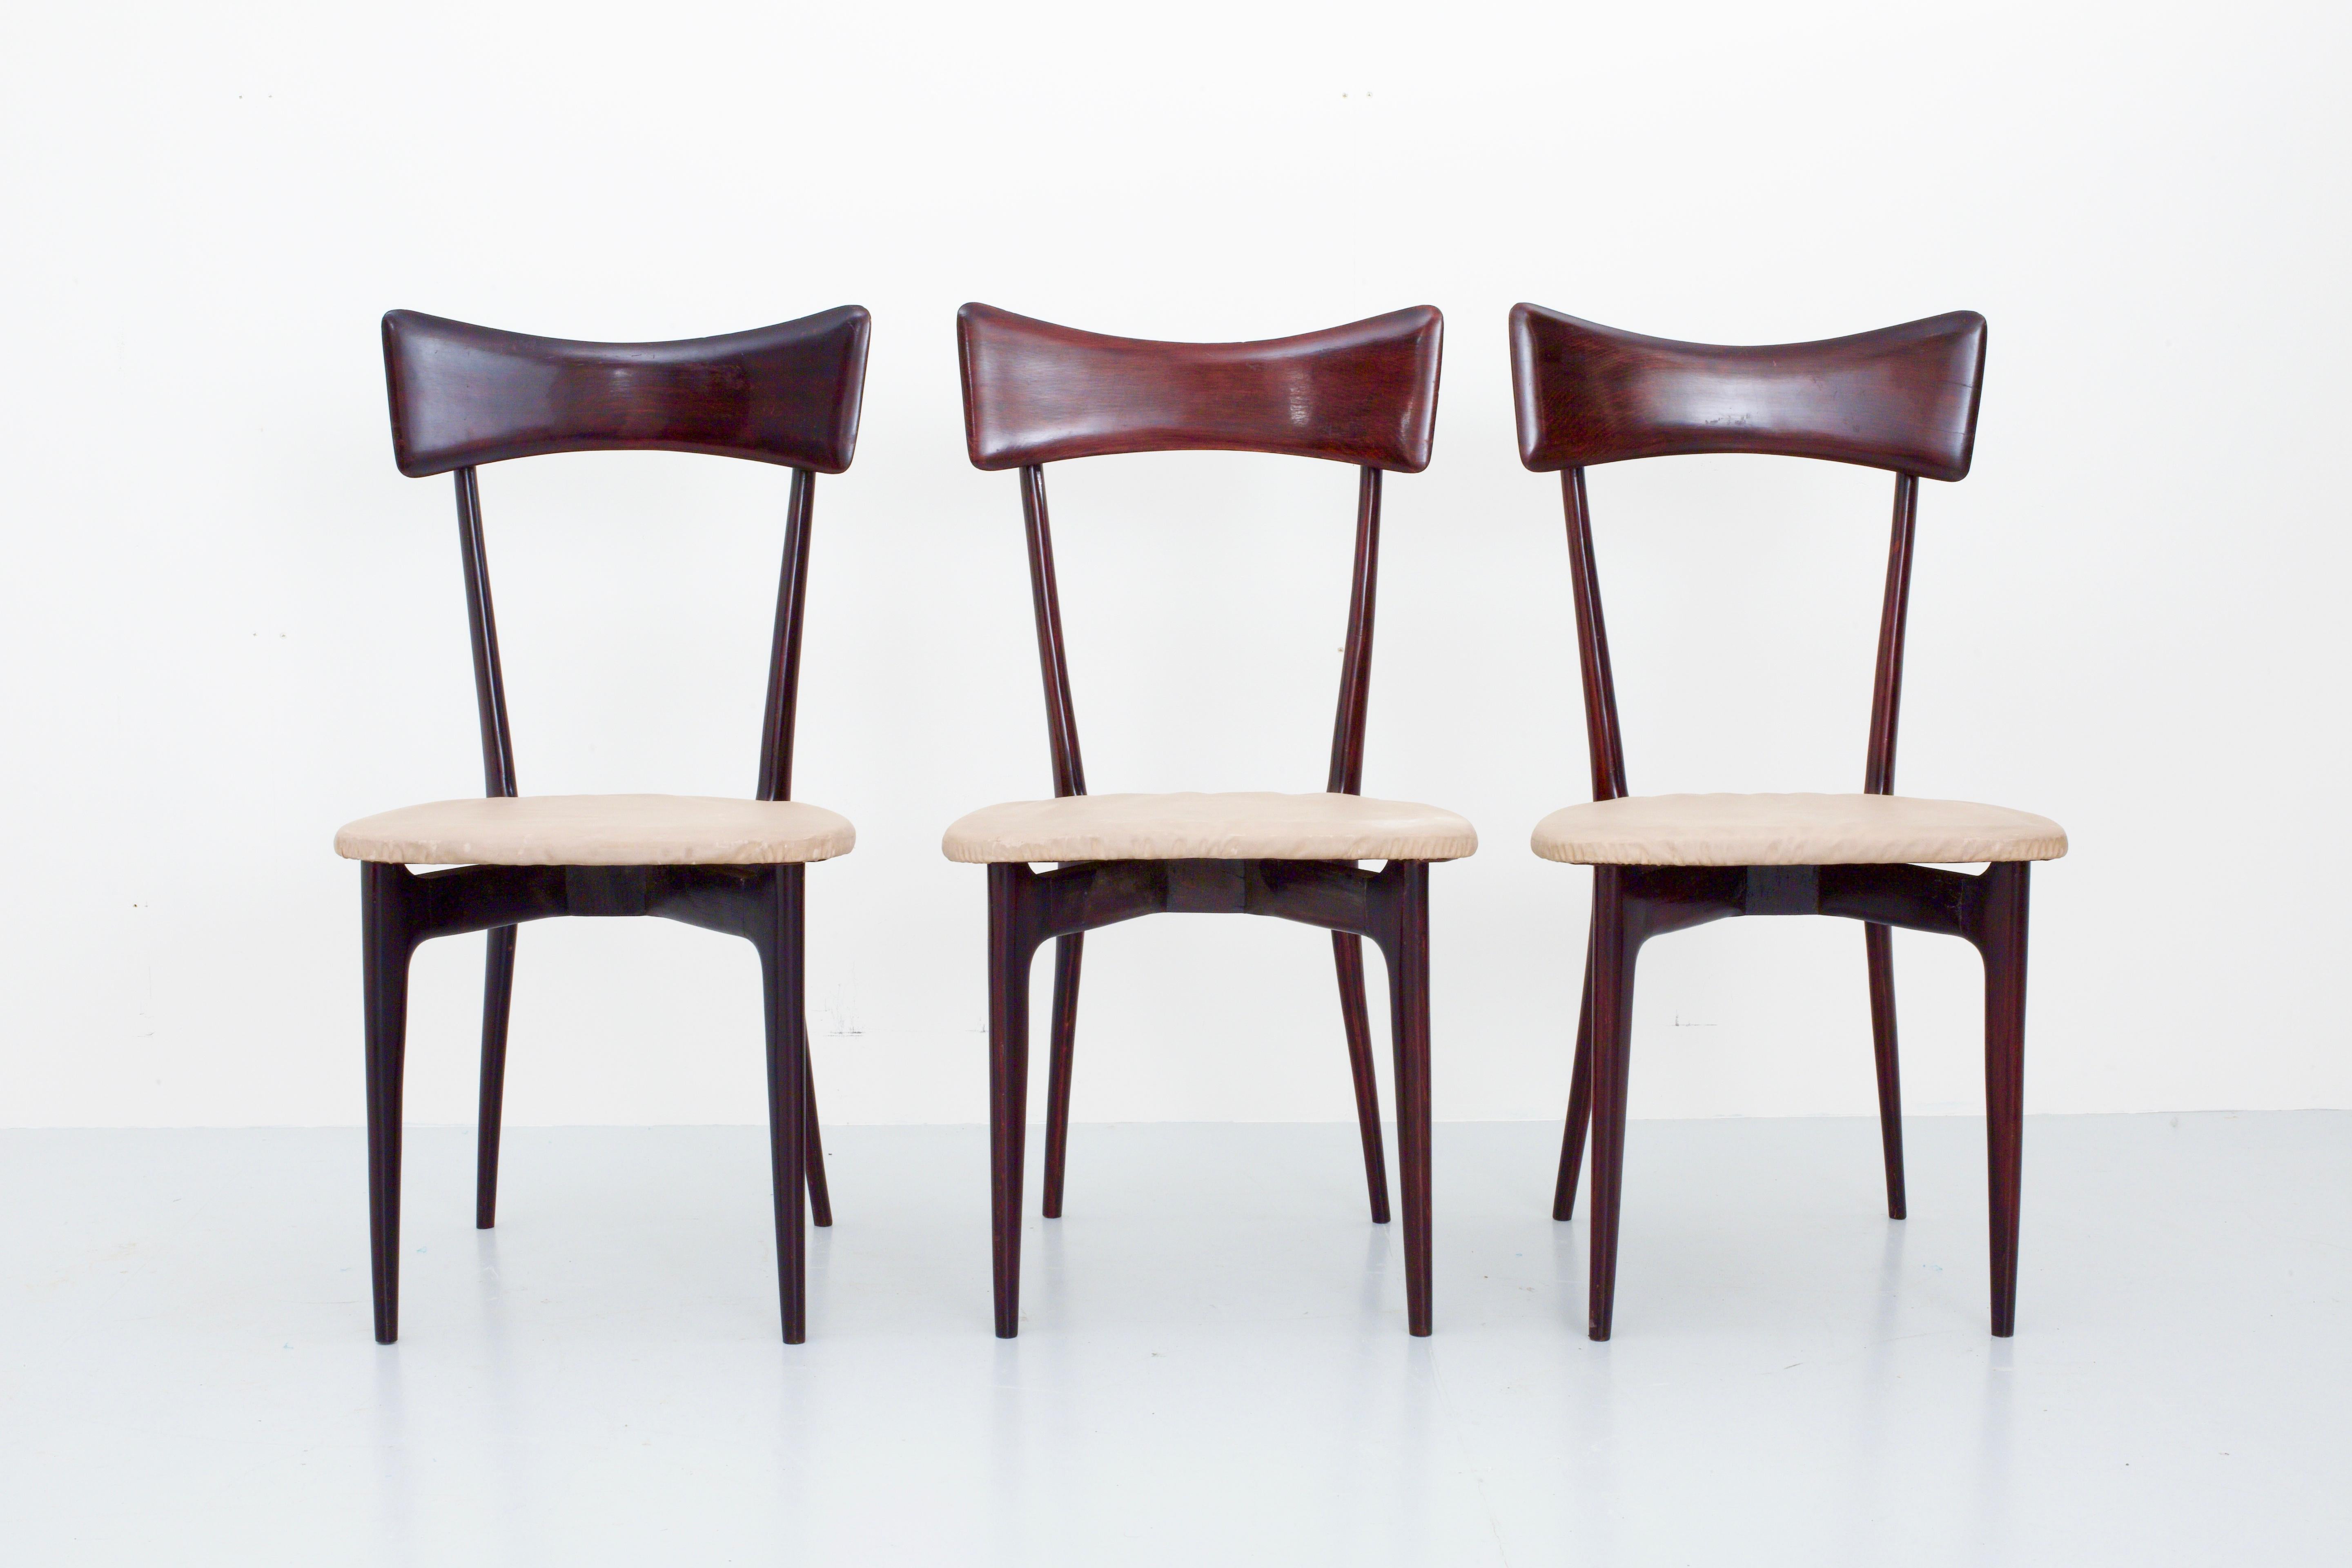 Set of three dining chairs in the well-known and typical style of Ico Parisi and his wife Luisa for Ariberto Colombo, Cantu, Italy, 1955. These chairs are a truly example of Italian design; elegant, round and light. With this beautiful patina still